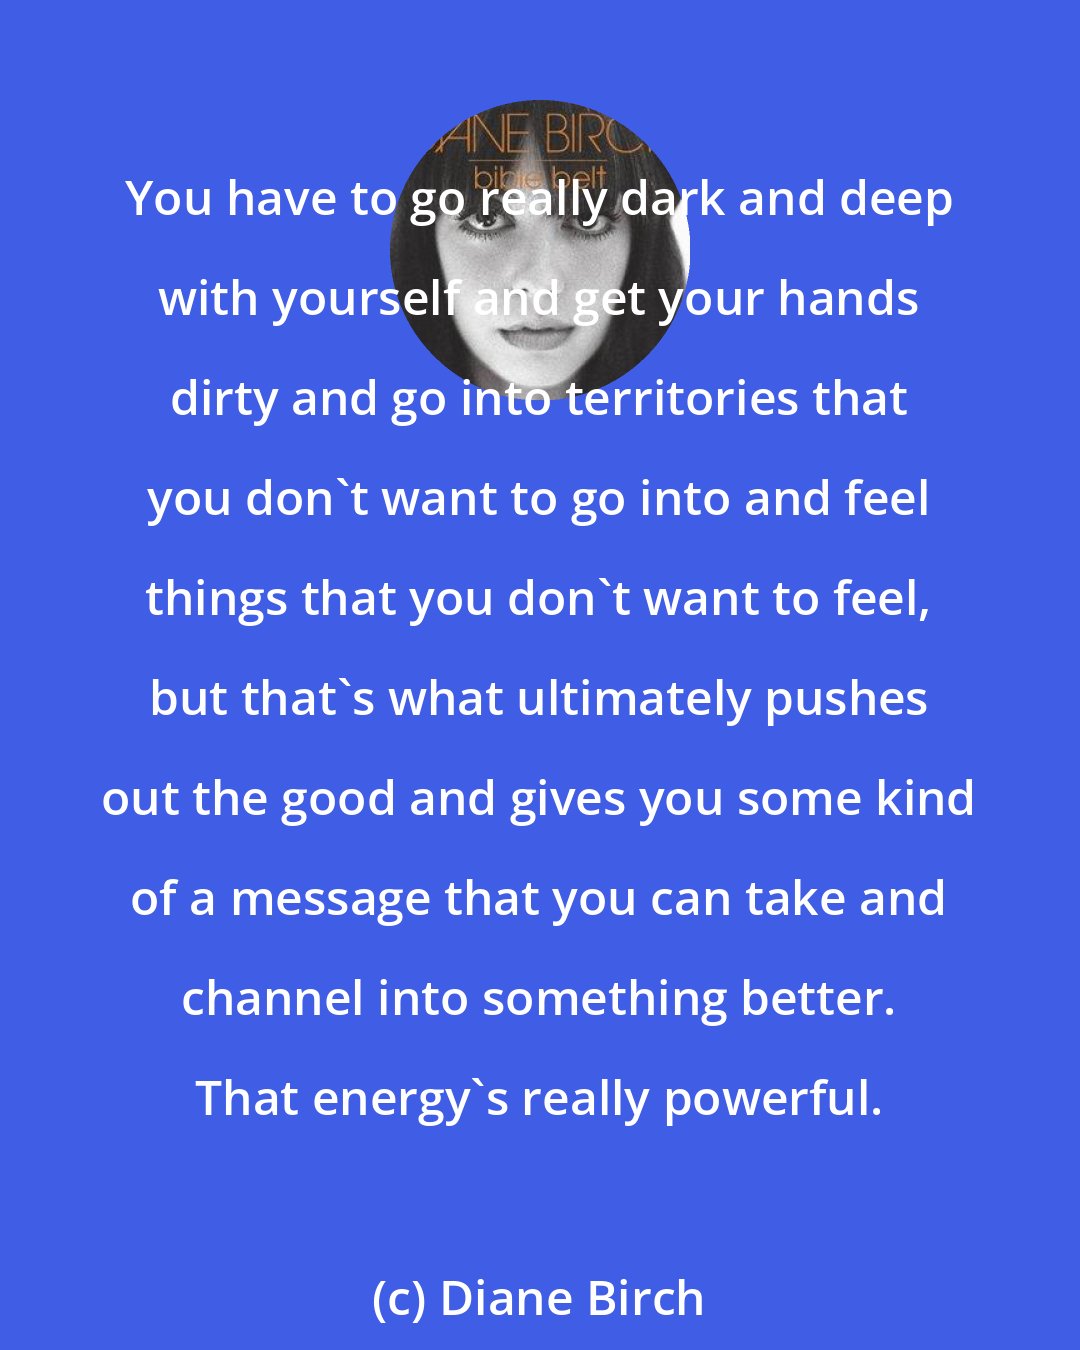 Diane Birch: You have to go really dark and deep with yourself and get your hands dirty and go into territories that you don't want to go into and feel things that you don't want to feel, but that's what ultimately pushes out the good and gives you some kind of a message that you can take and channel into something better. That energy's really powerful.